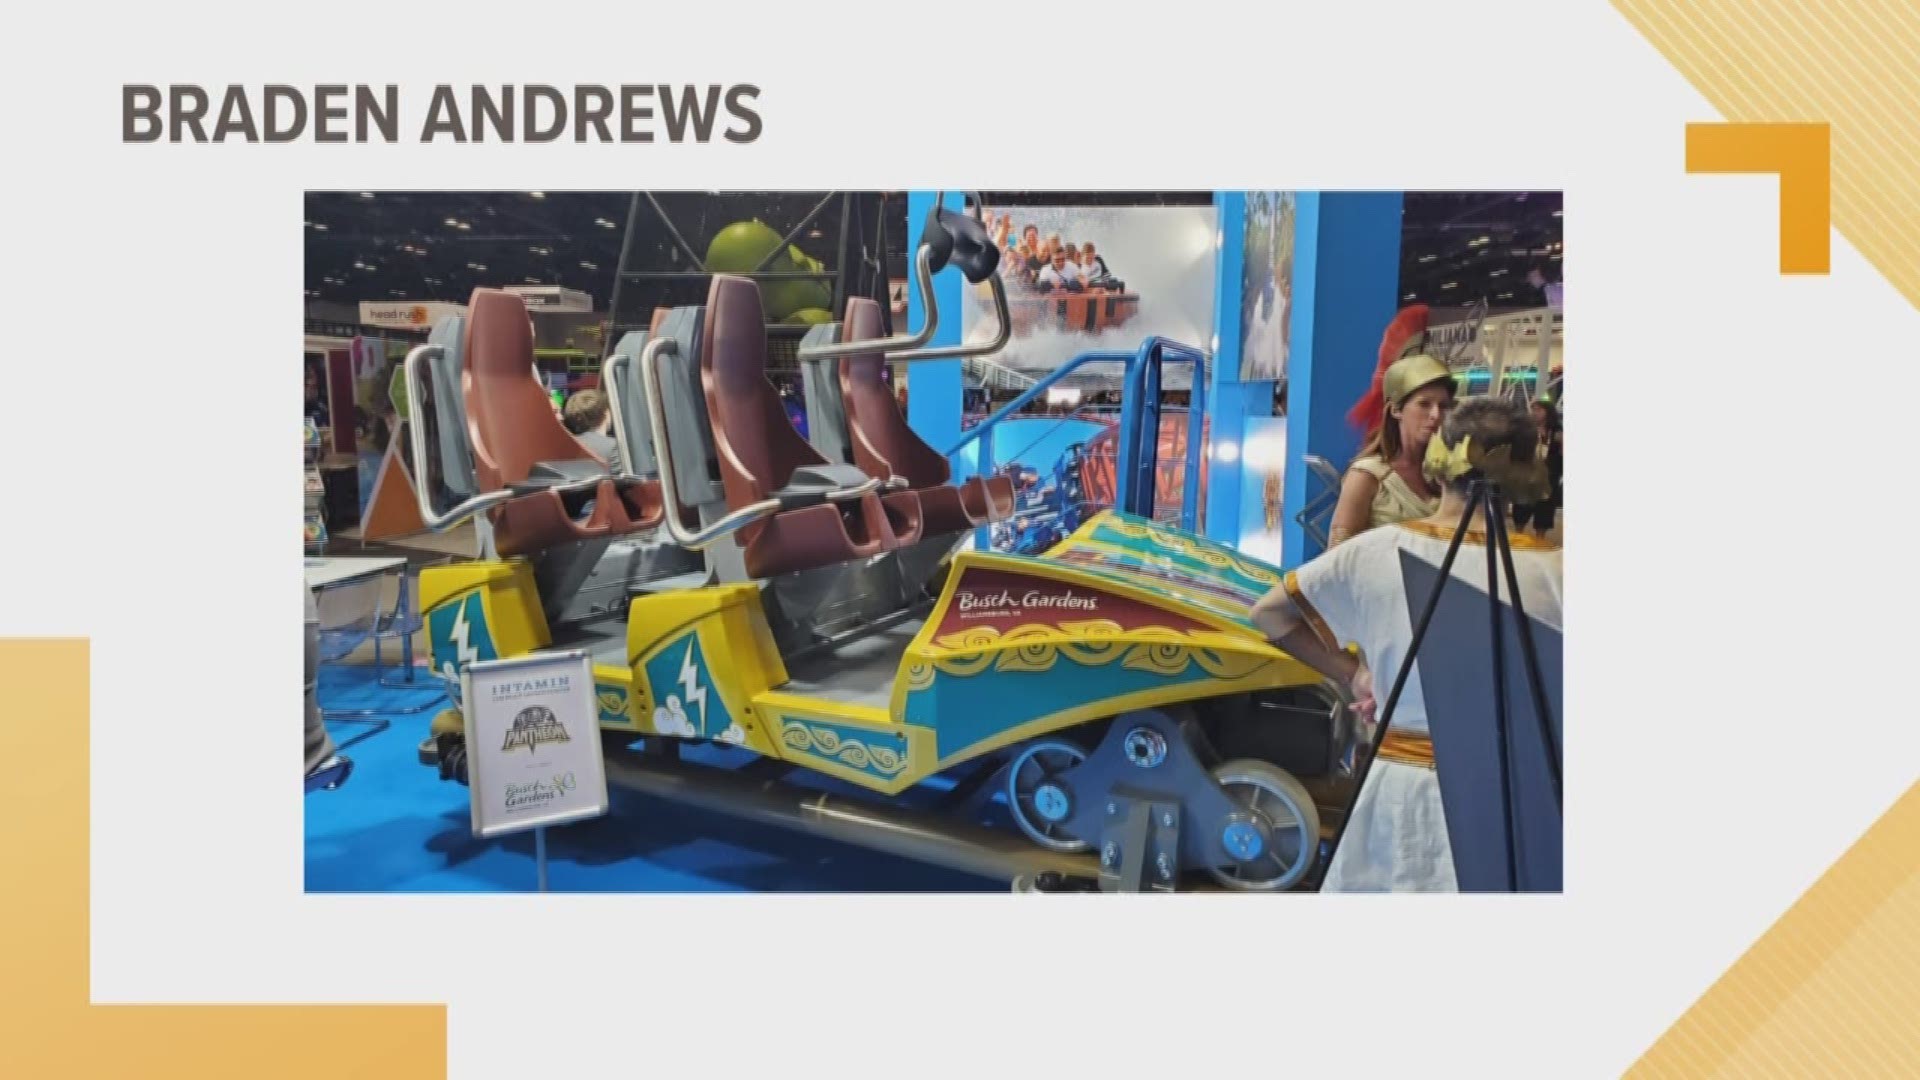 The cars that will be used on Pantheon were unveiled at a theme park expo in Orlando. The roller coast will open at Busch Gardens Williamsburg next year.